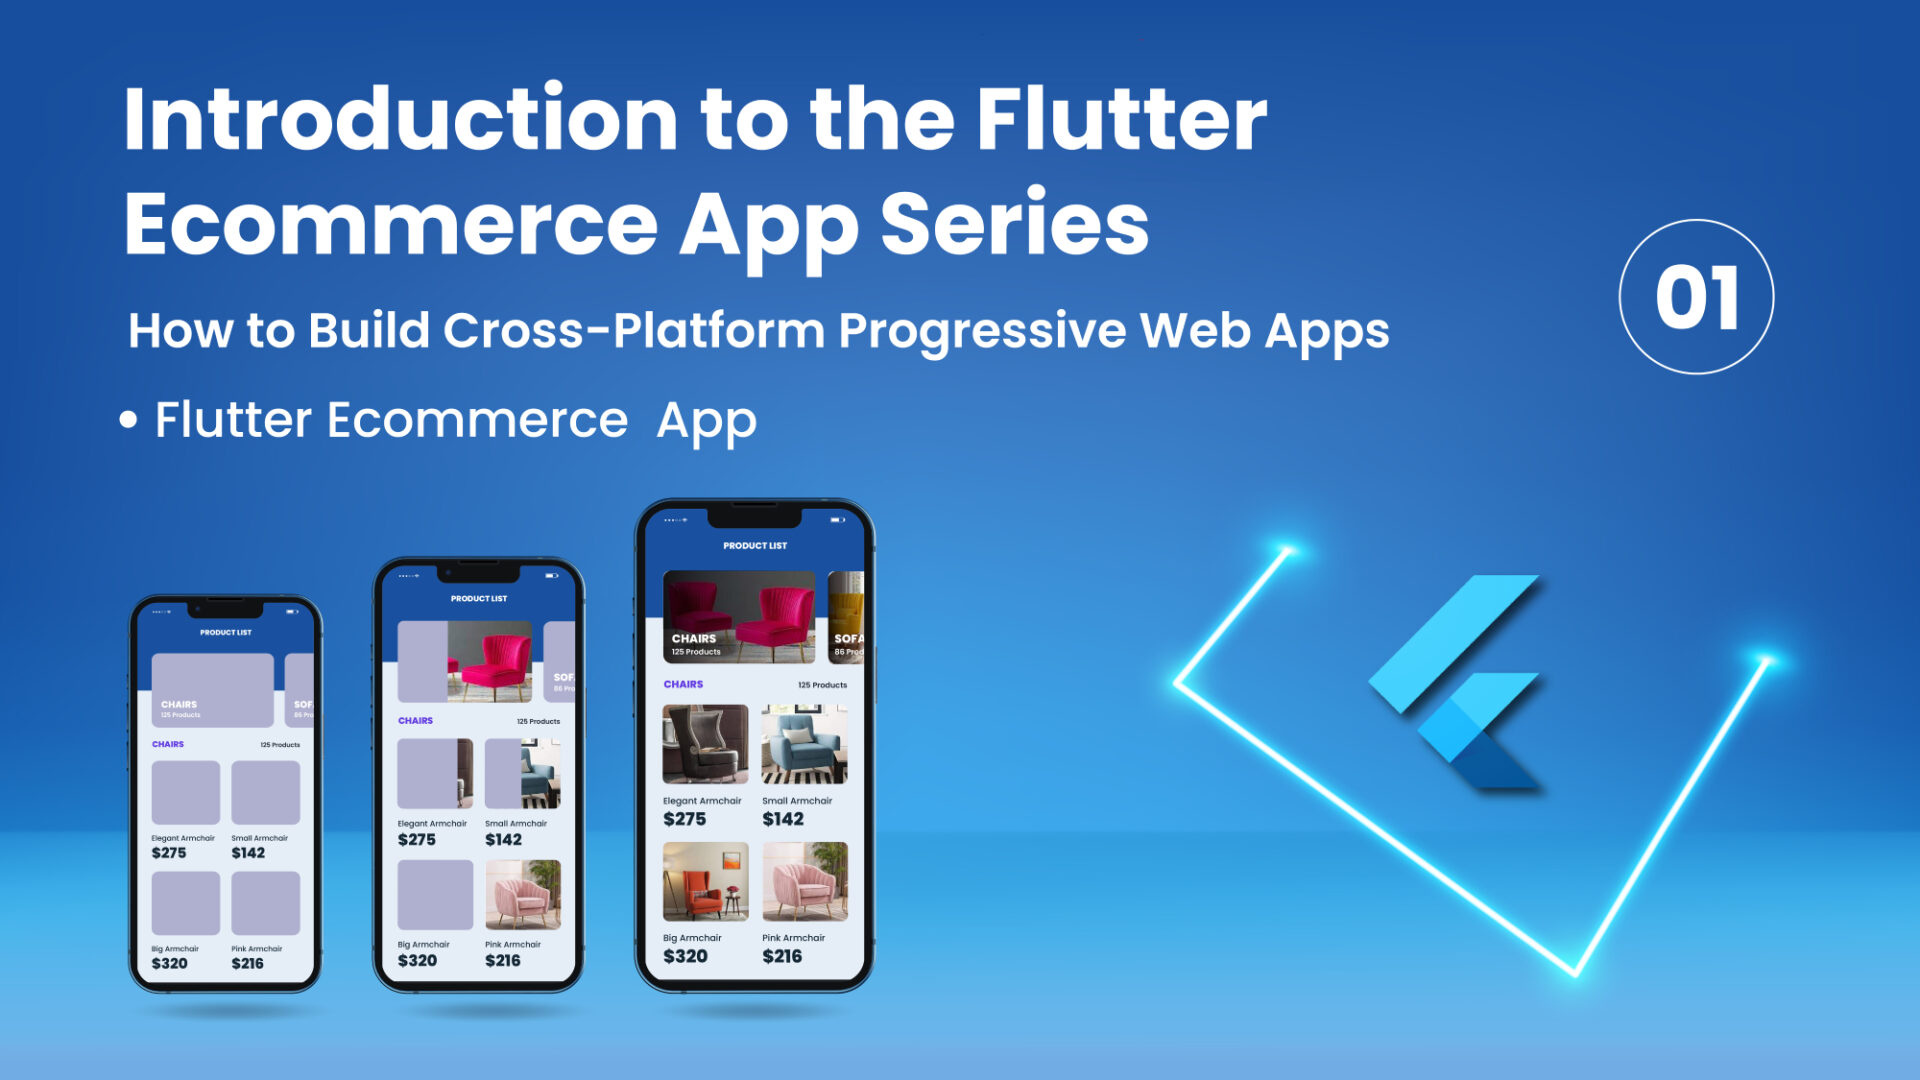 Introduction to the Flutter Ecommerce App Series